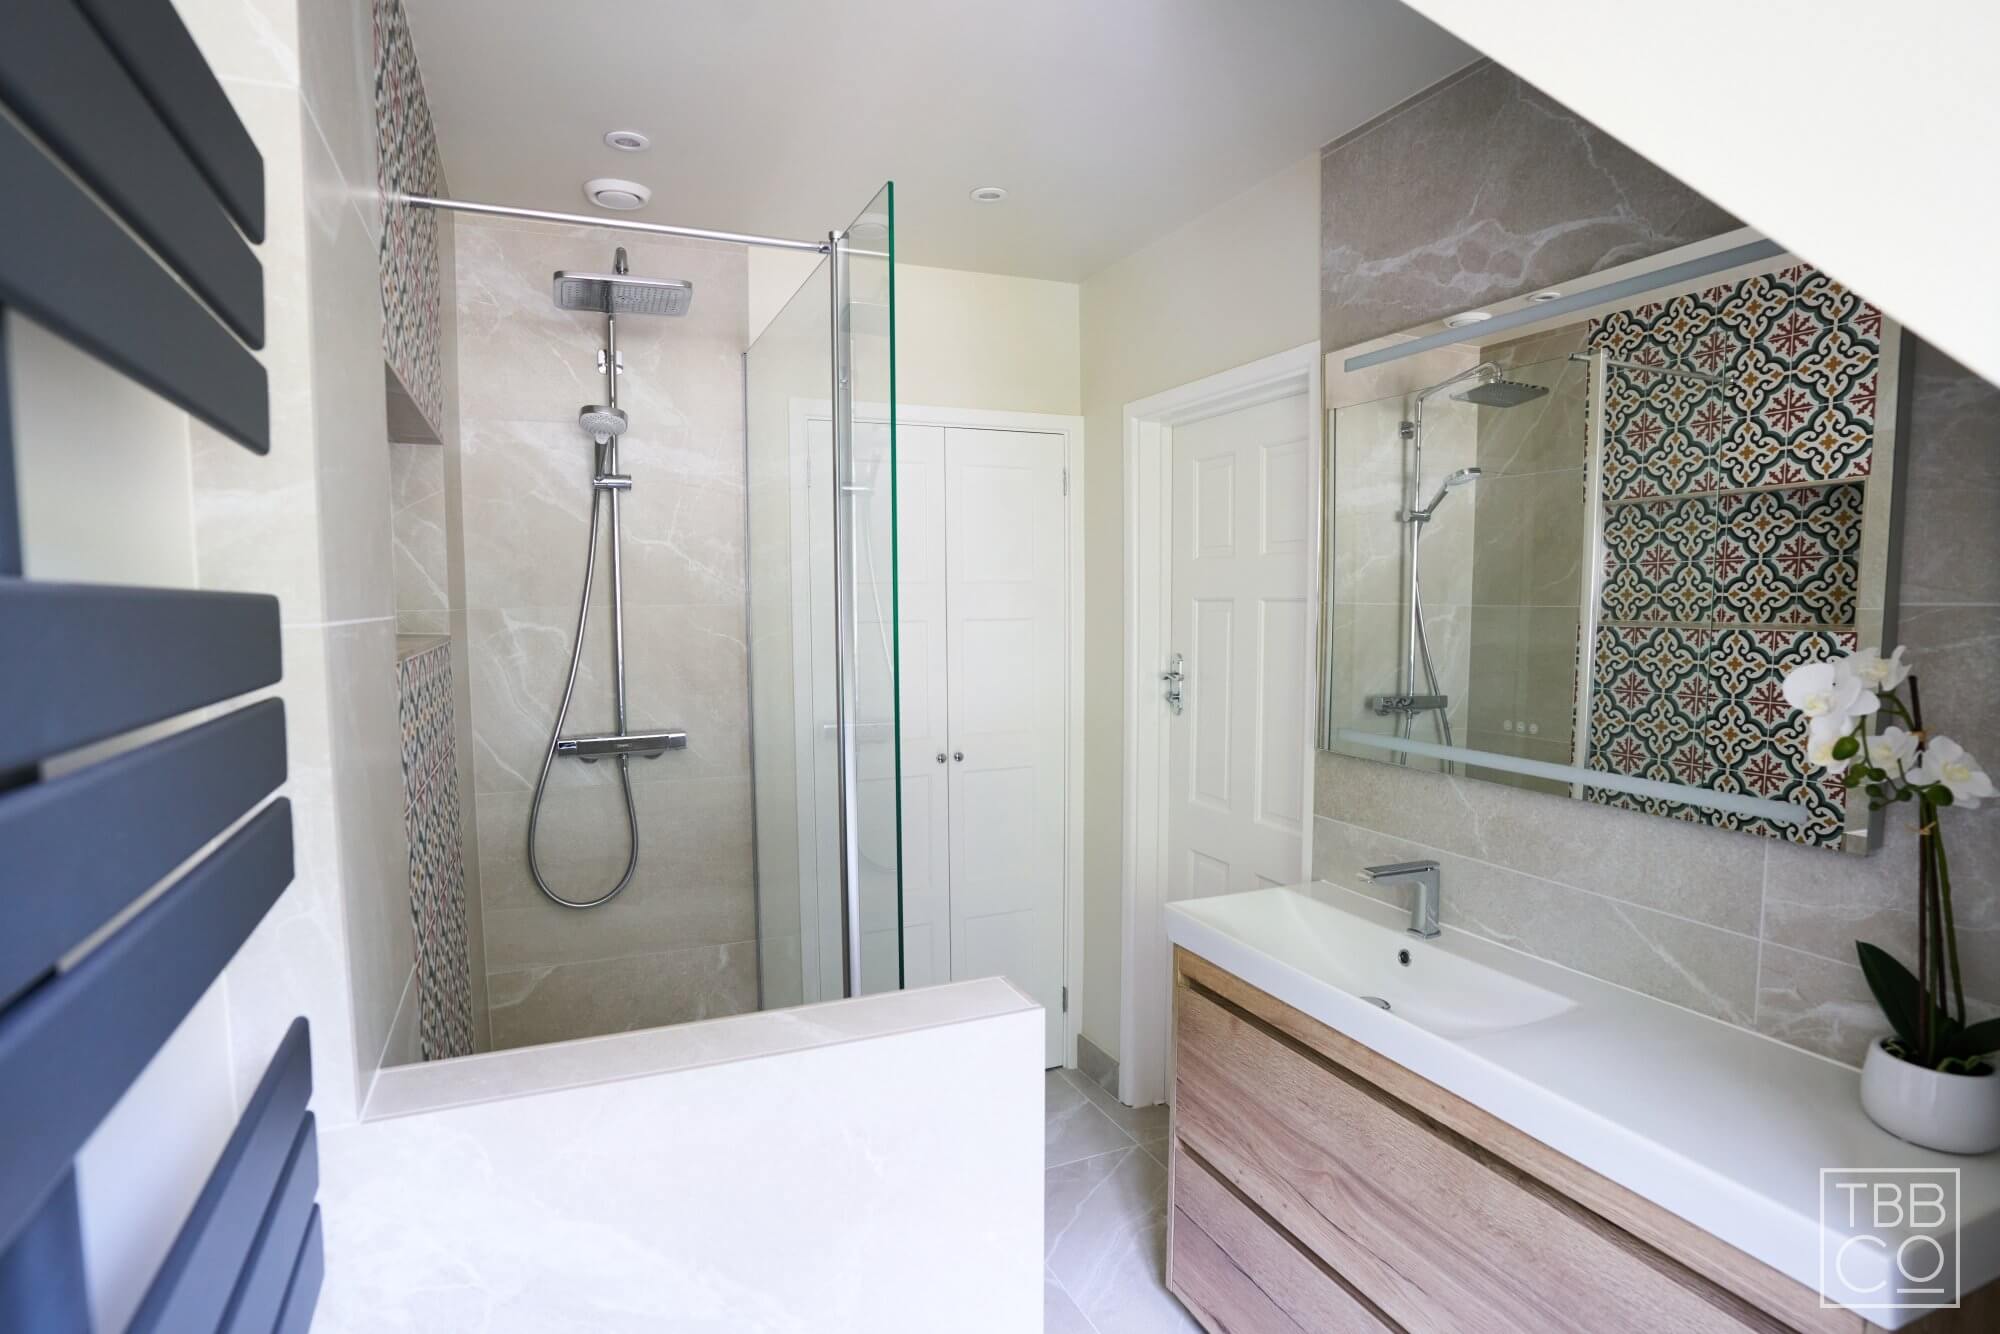 Low Wall to Hide Toile and Timber Vanity in Shower Room Design